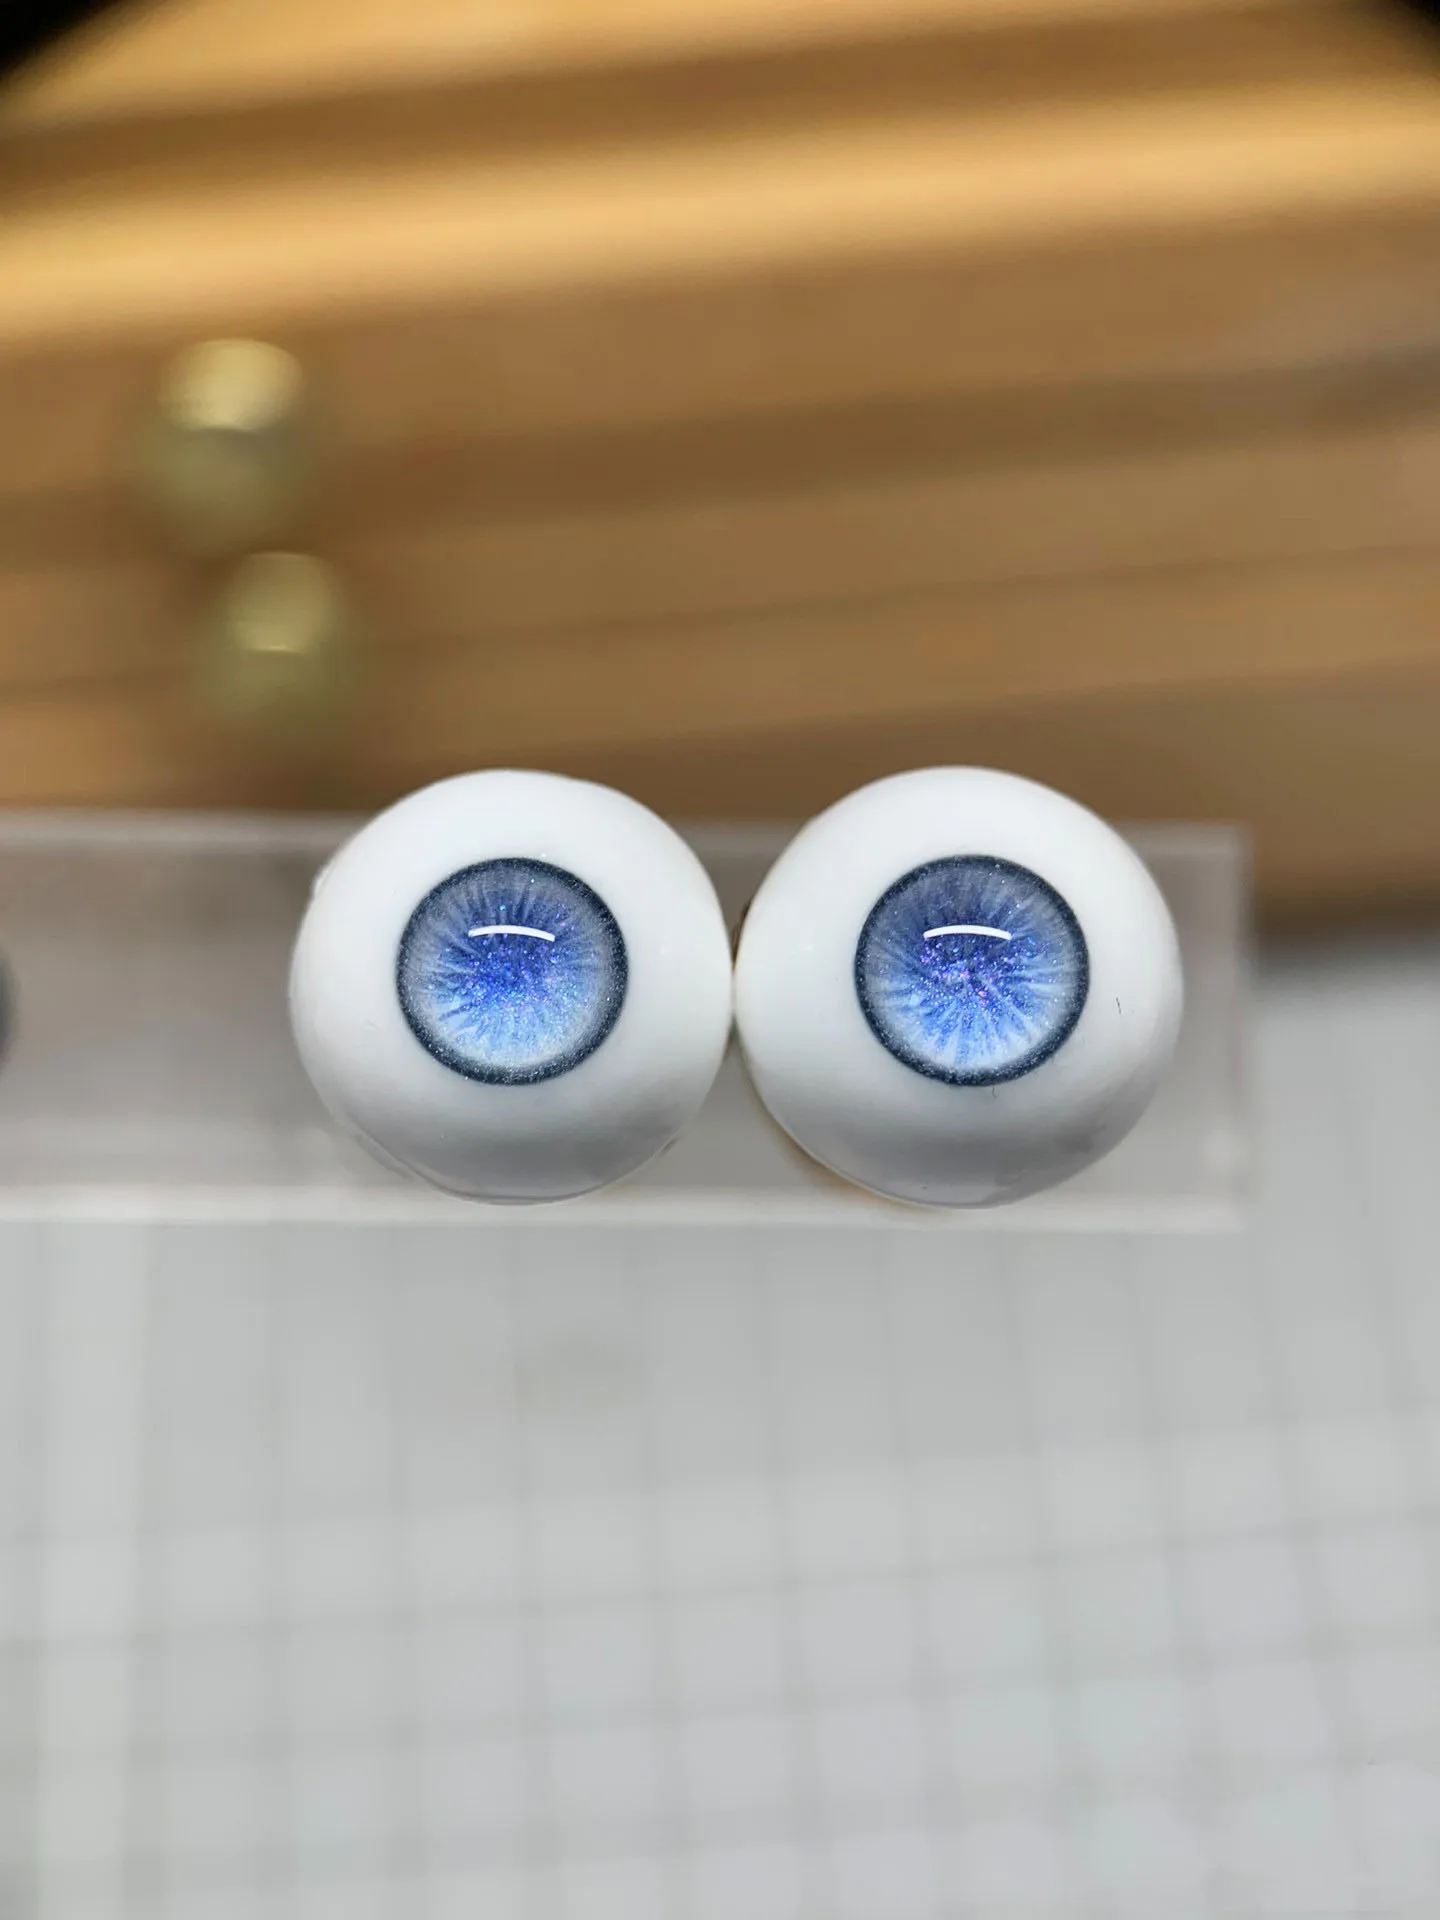 

1/3 1/4 1/6 BJD Doll Accessories Eyes For Toys Plaster Safety Eyeball “Blue Snowflake” OB11 Eyes For Crafts Free Shipping